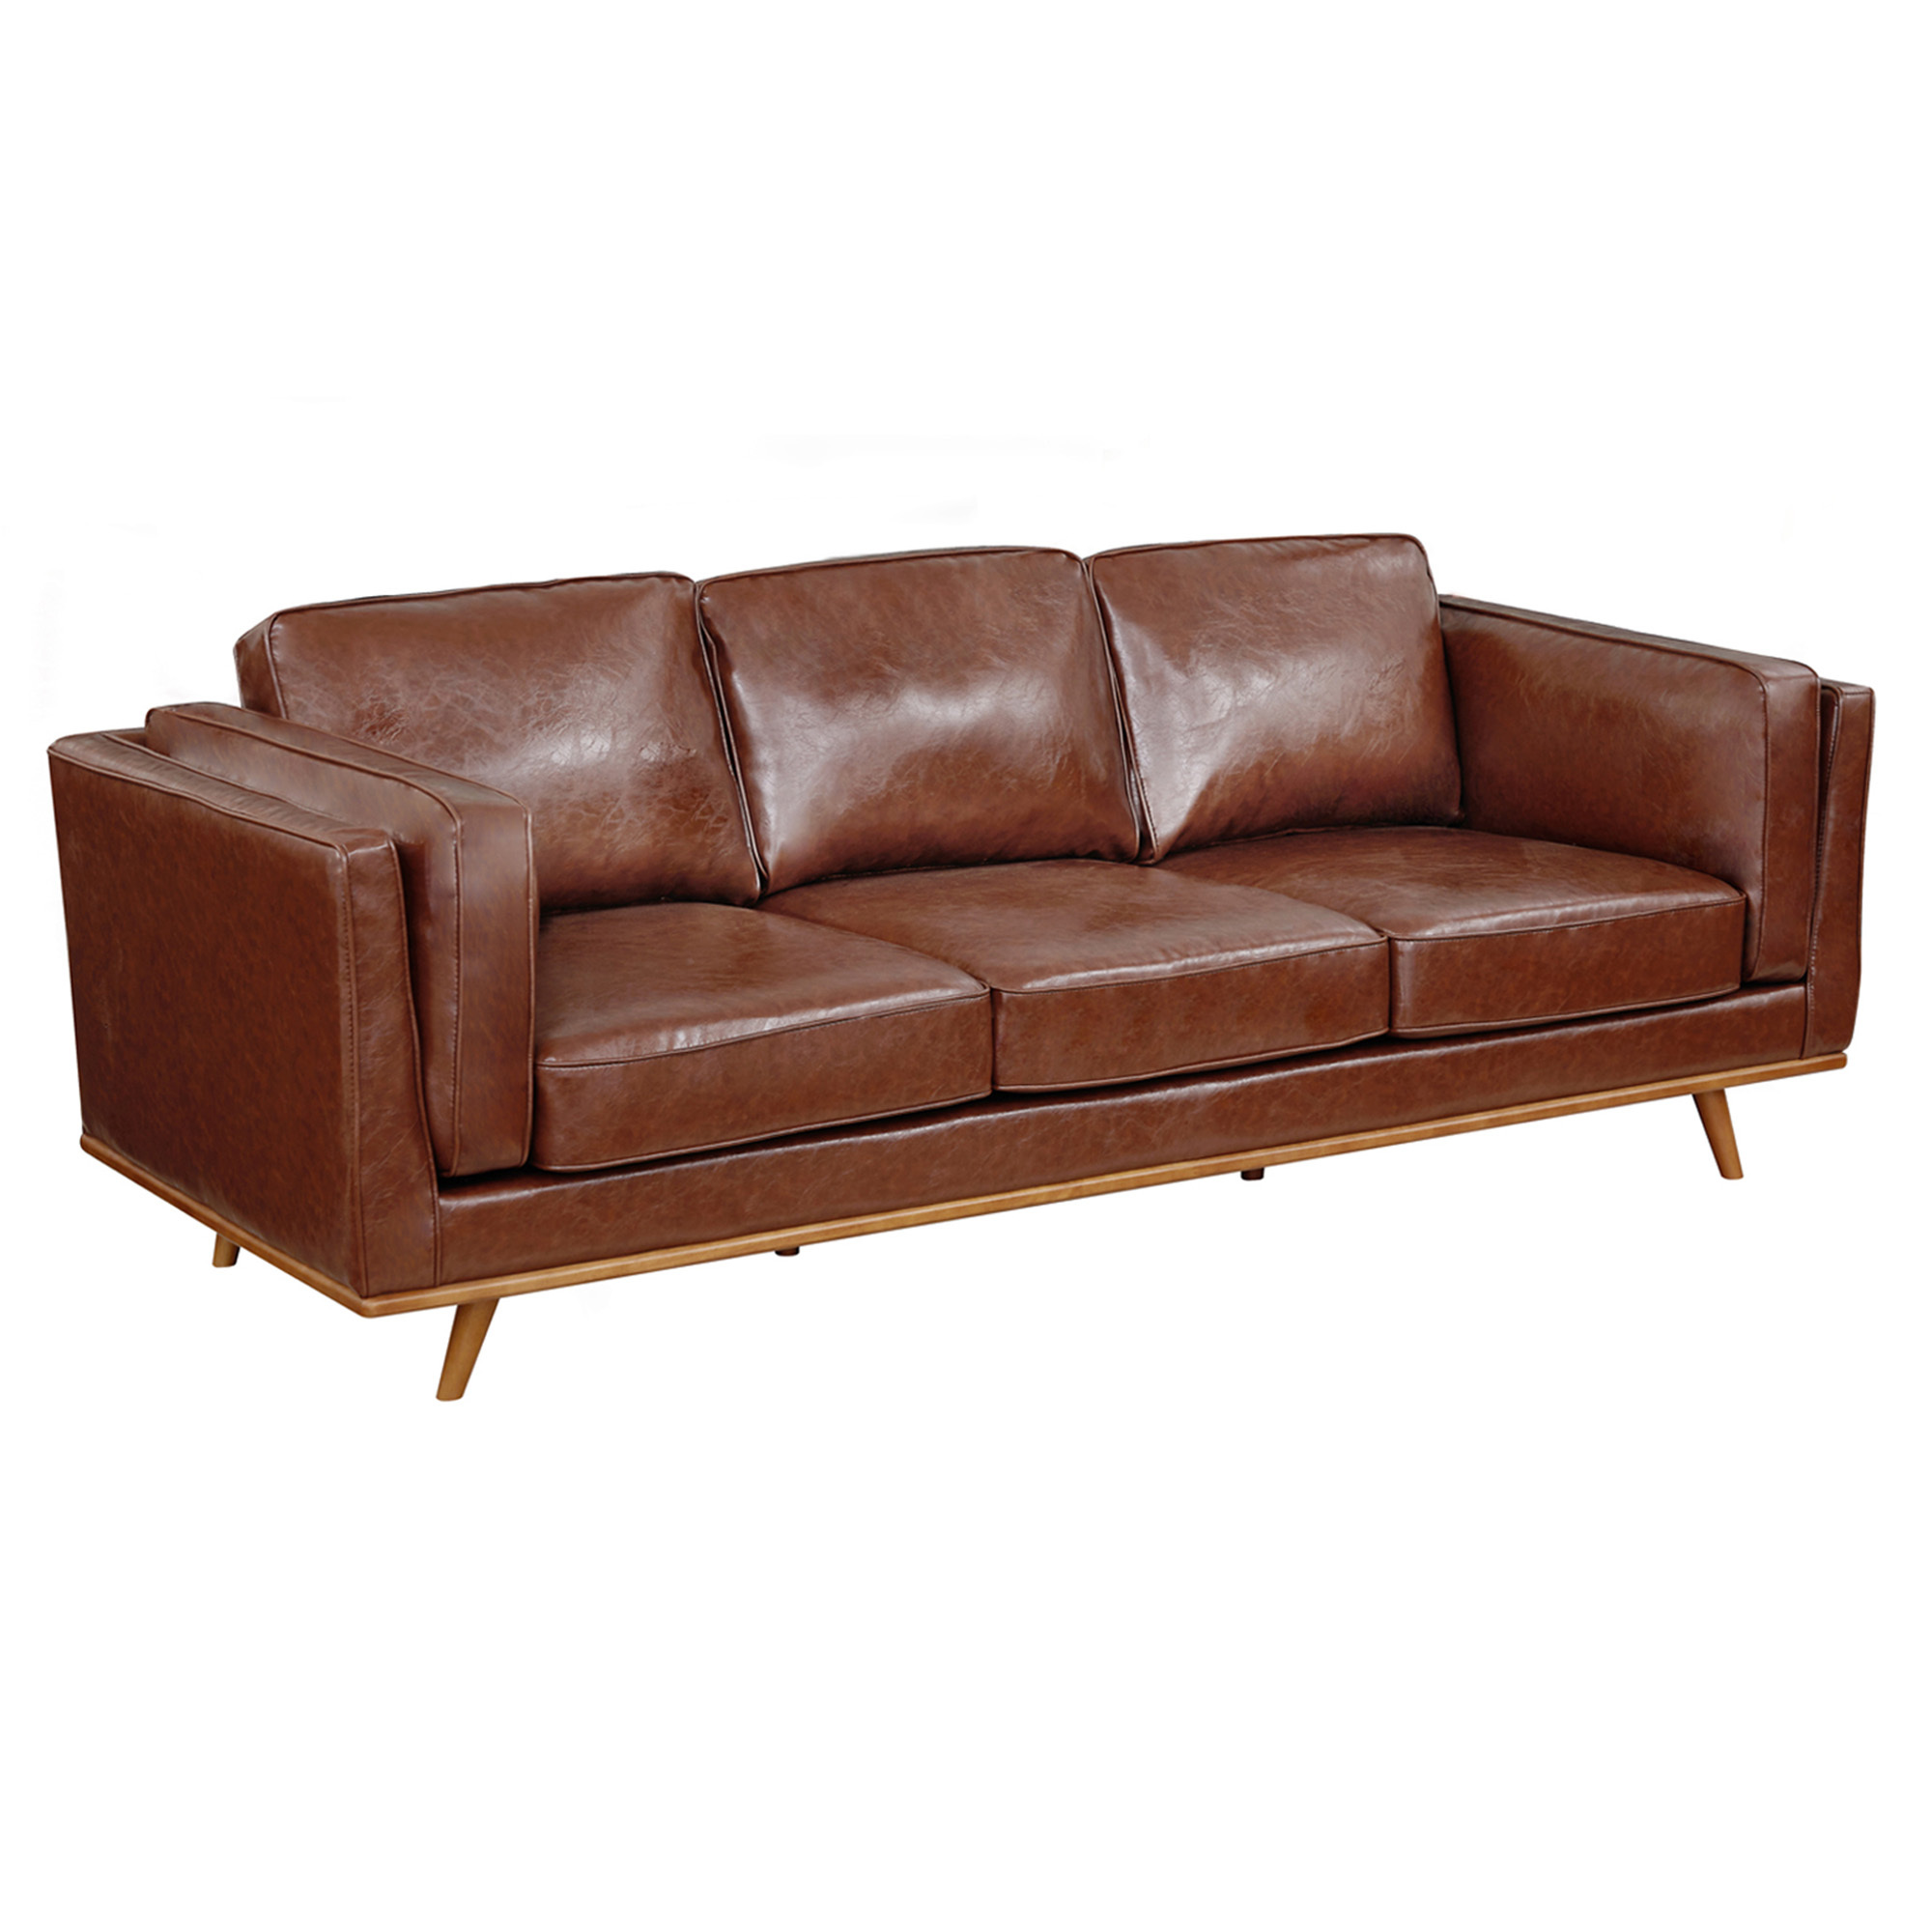 Southern Stylers Brown Brooklyn Faux, Brown Faux Leather Sleeper Sofa